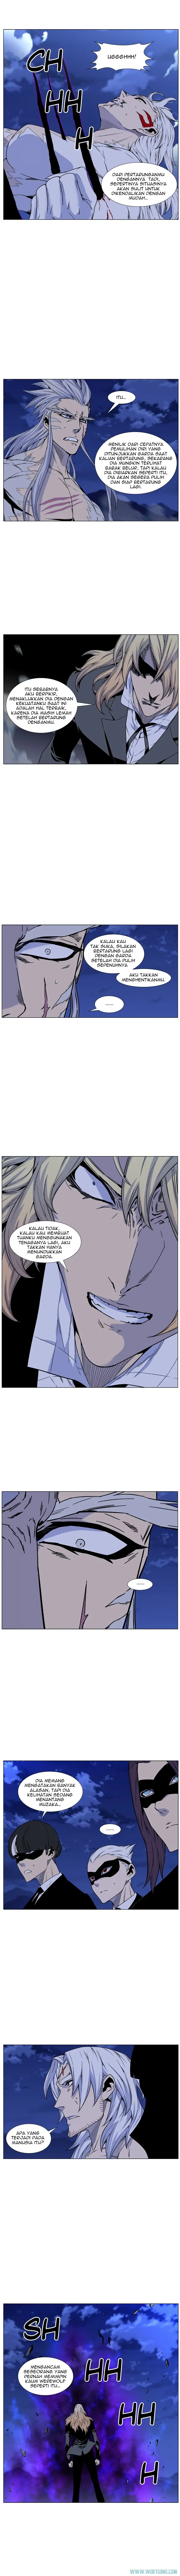 Noblesse Chapter 463 - 67